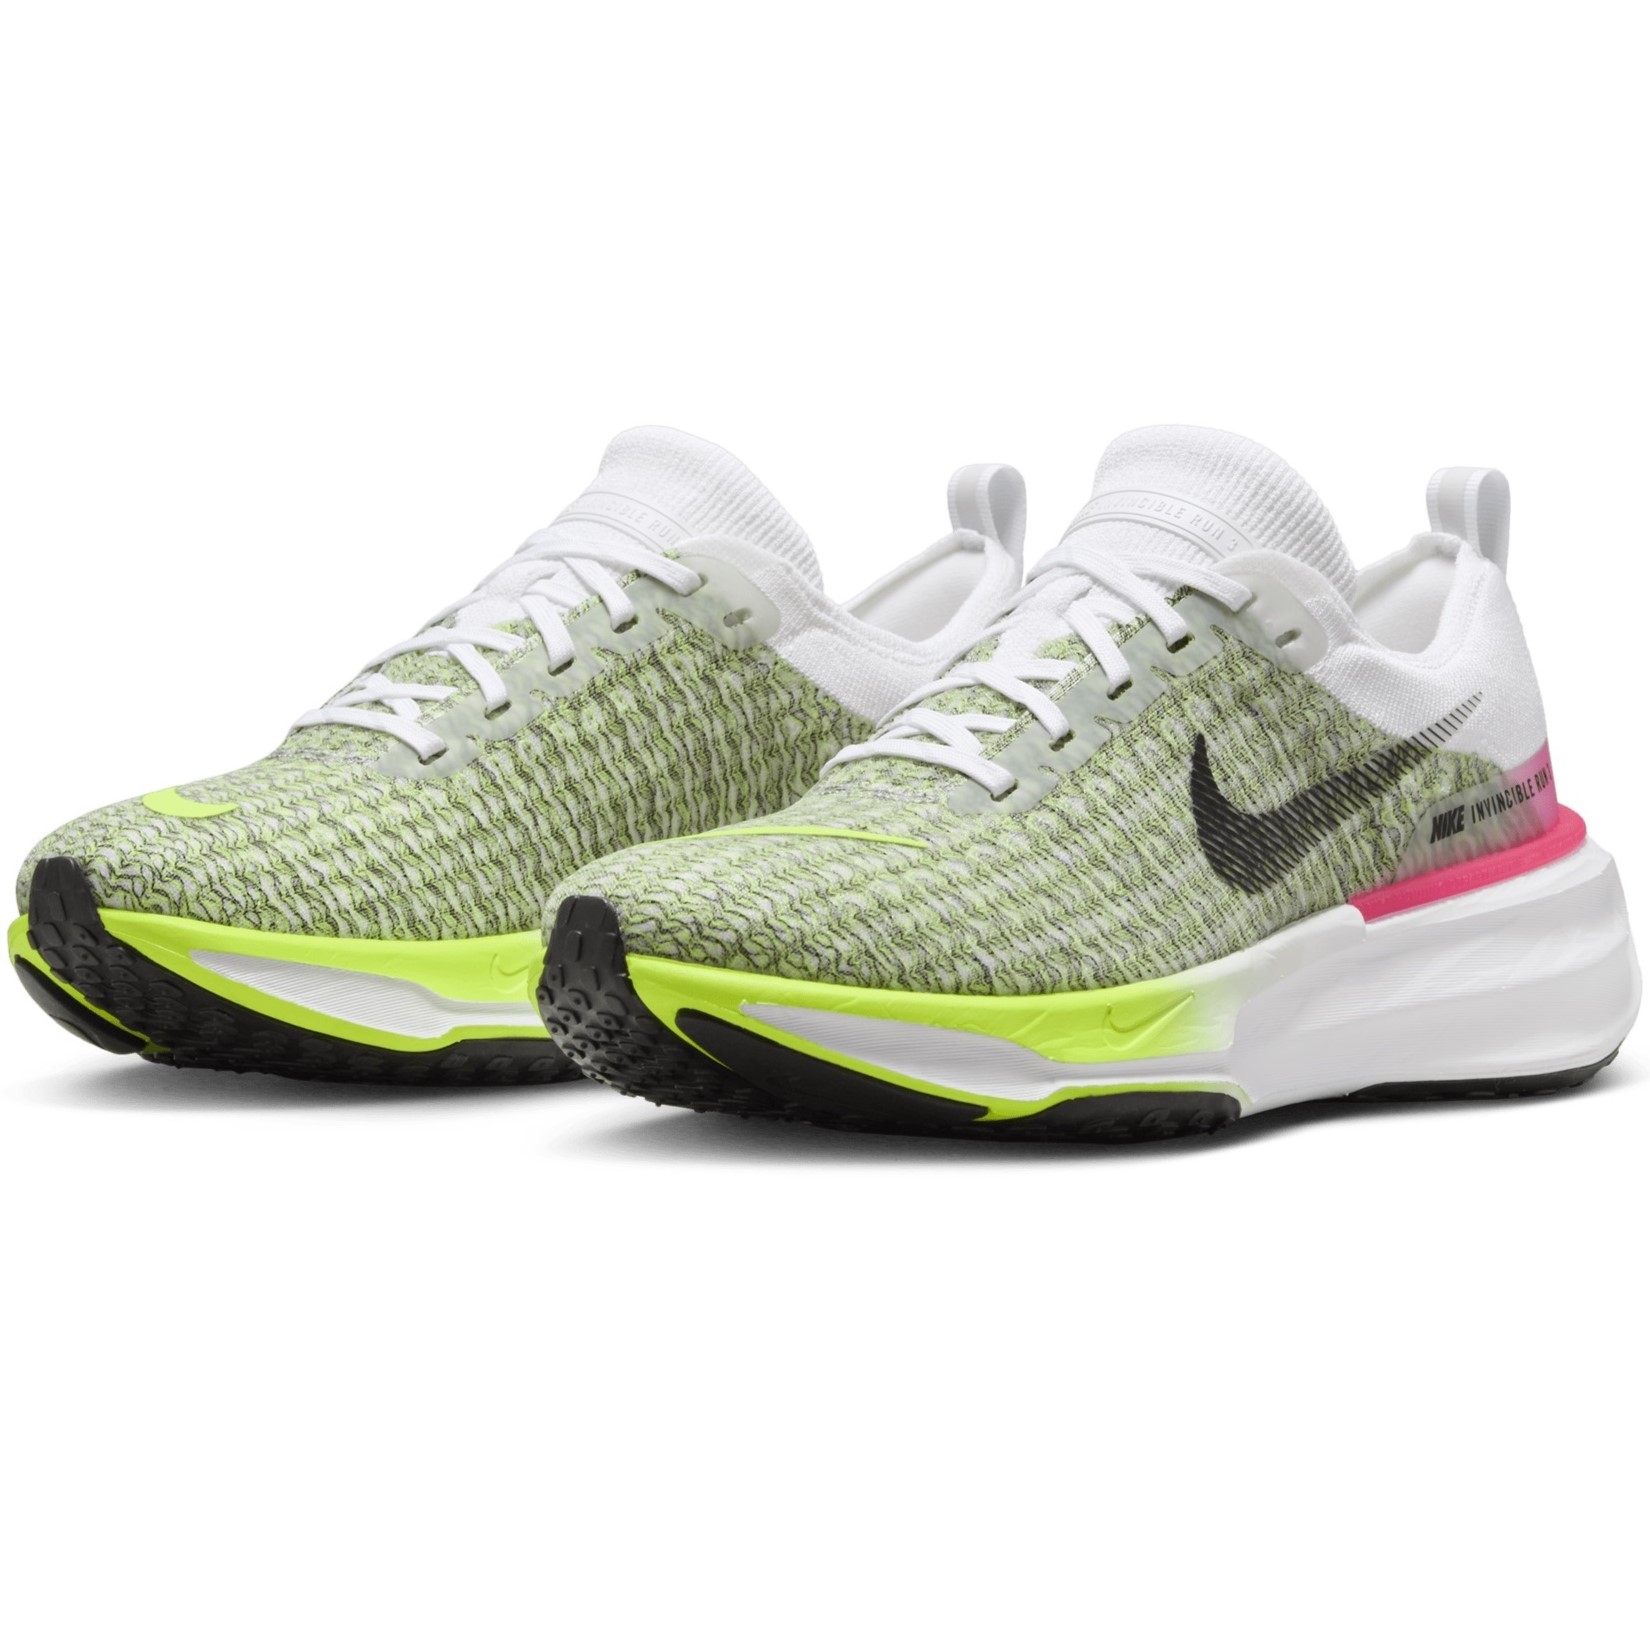 GIÀY CHAY BỘ NIKE NỮ WOMENS ZOOMX INVINCIBLE 3 ROAD RUNNING SHOES WHITE VOLT HYPER PINK FN6821-100 8